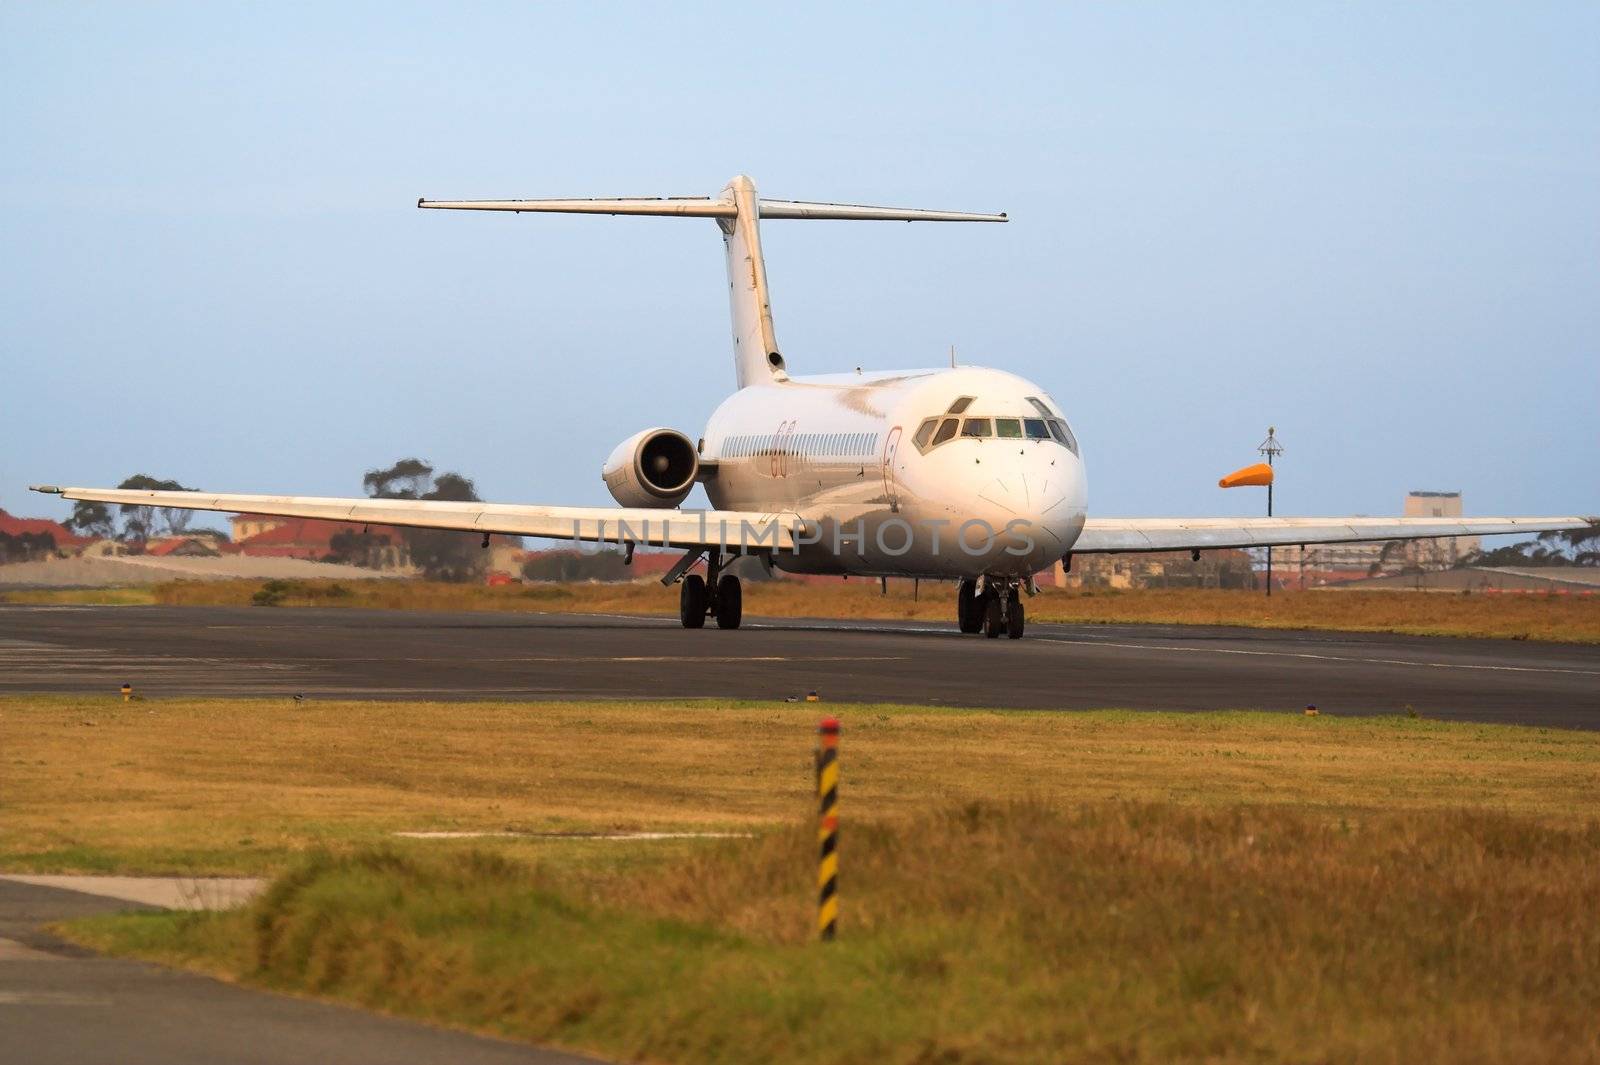 A passenger jetliner on the runway before take off